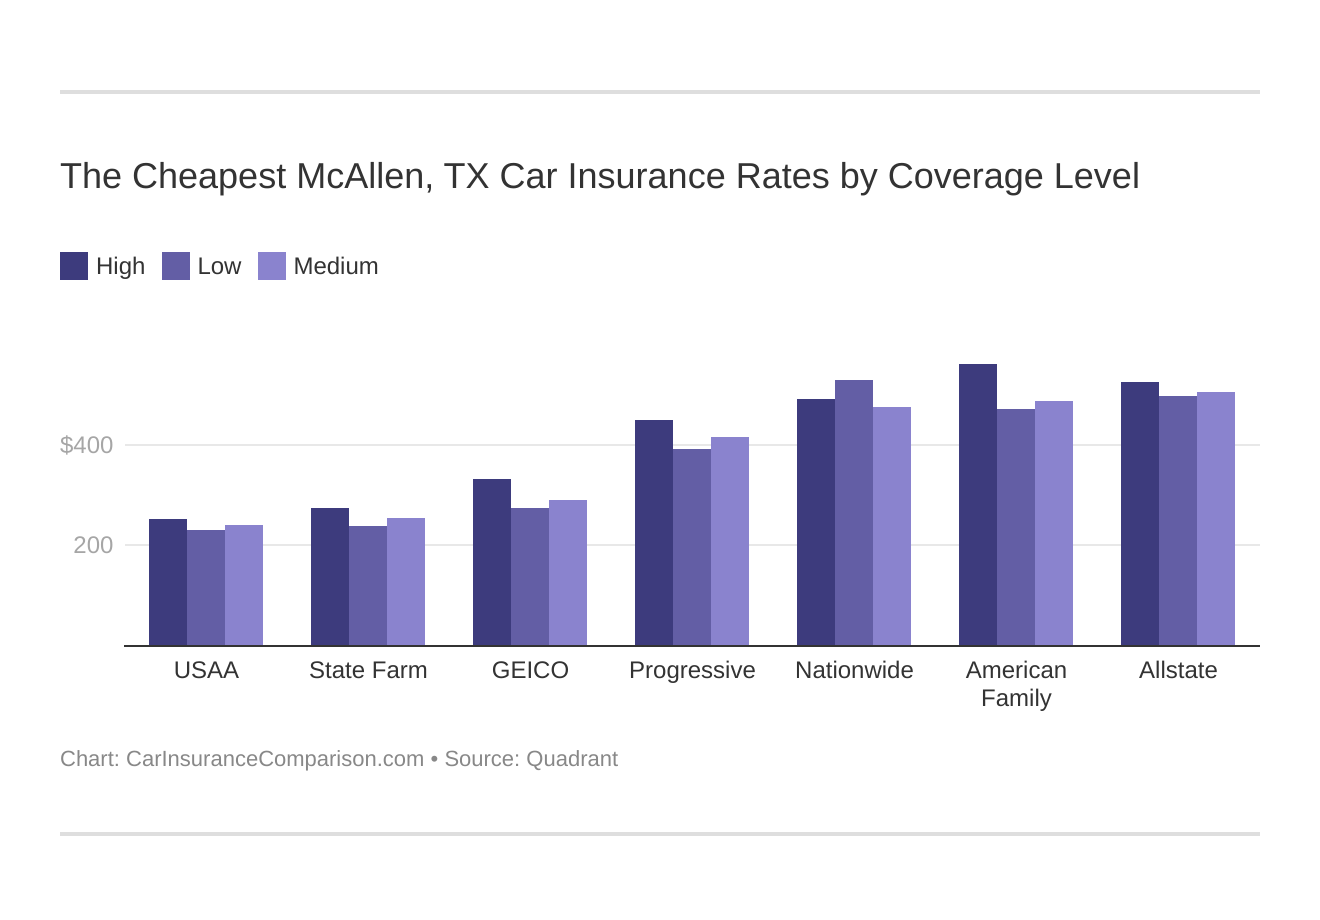 The Cheapest McAllen, TX Car Insurance Rates by Coverage Level